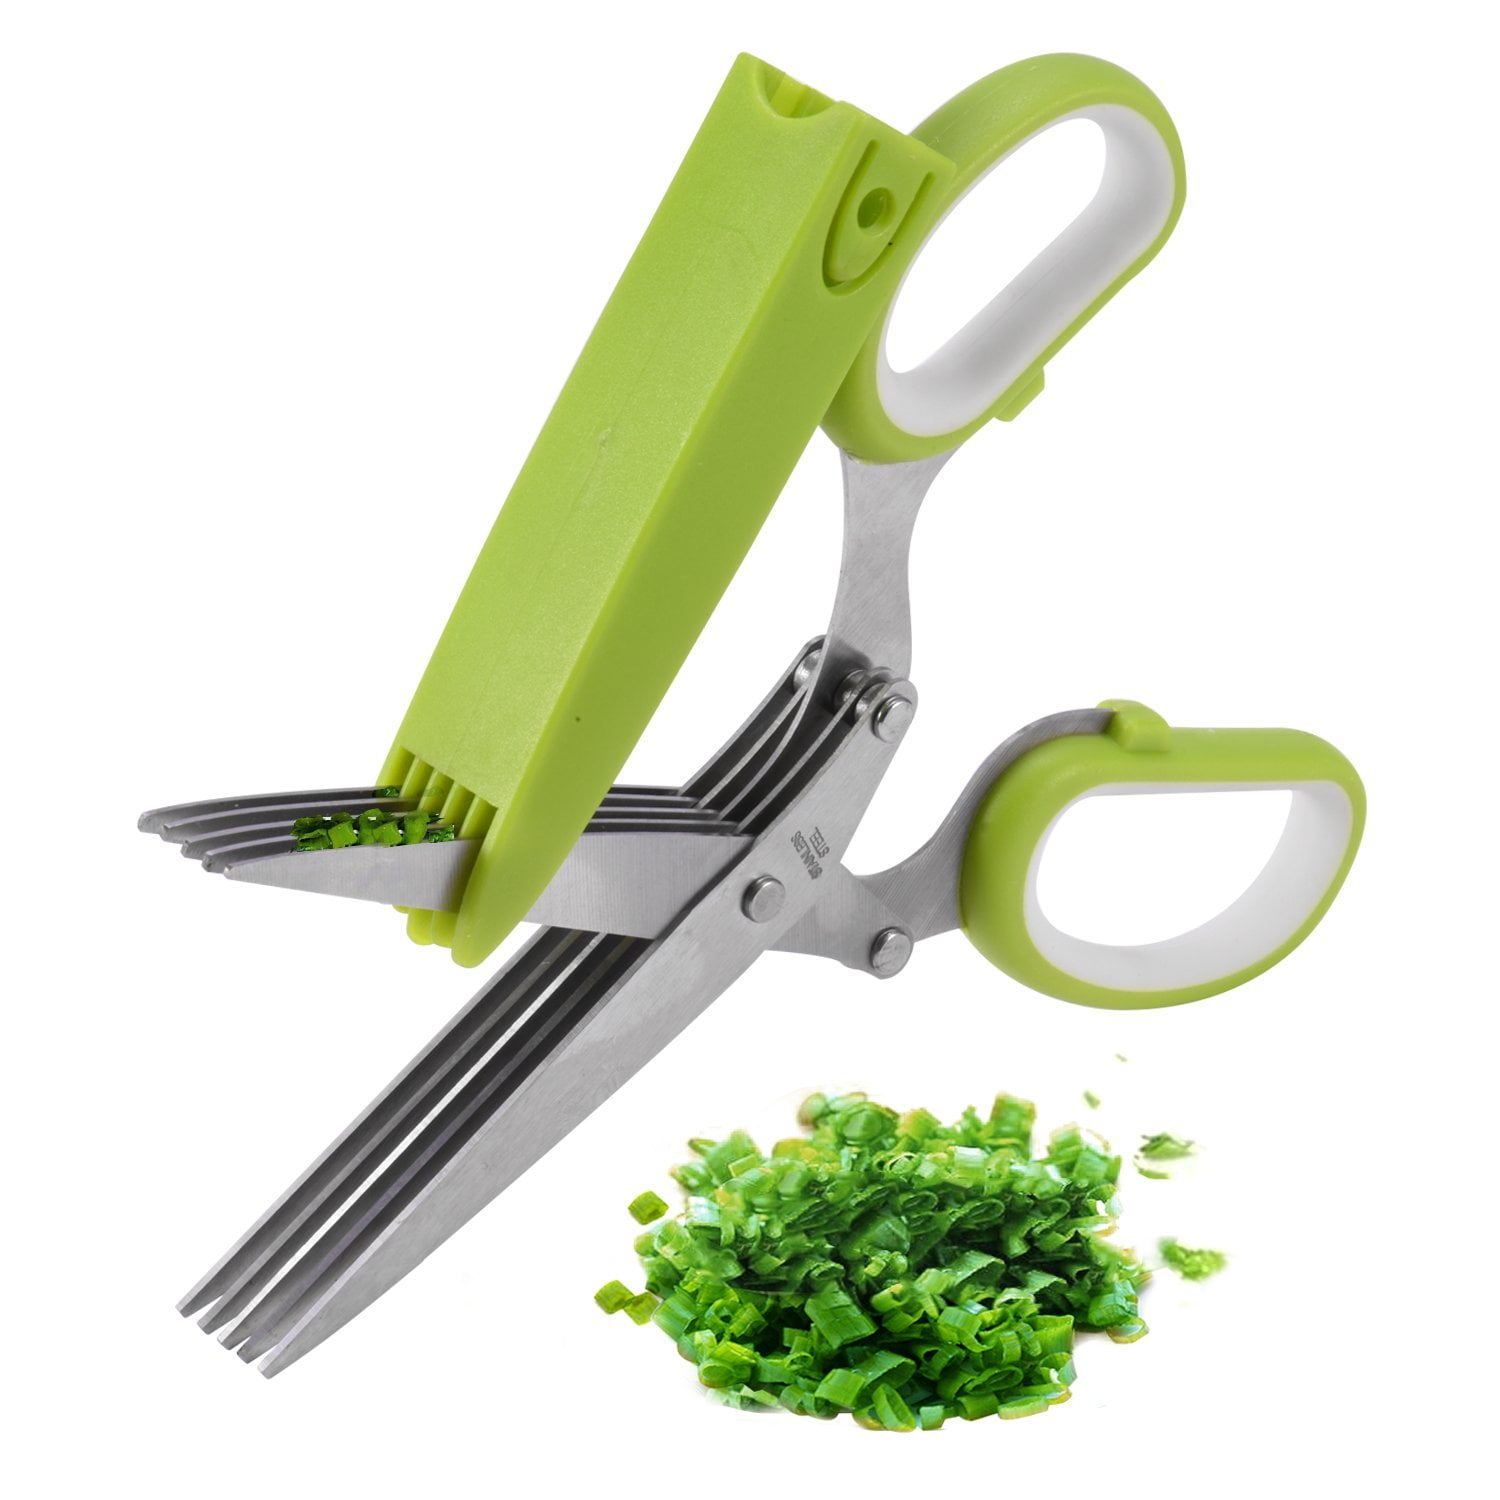 X-Chef Multipurpose 5 Blade Herb Scissors Review - Aromatherapy Anywhere